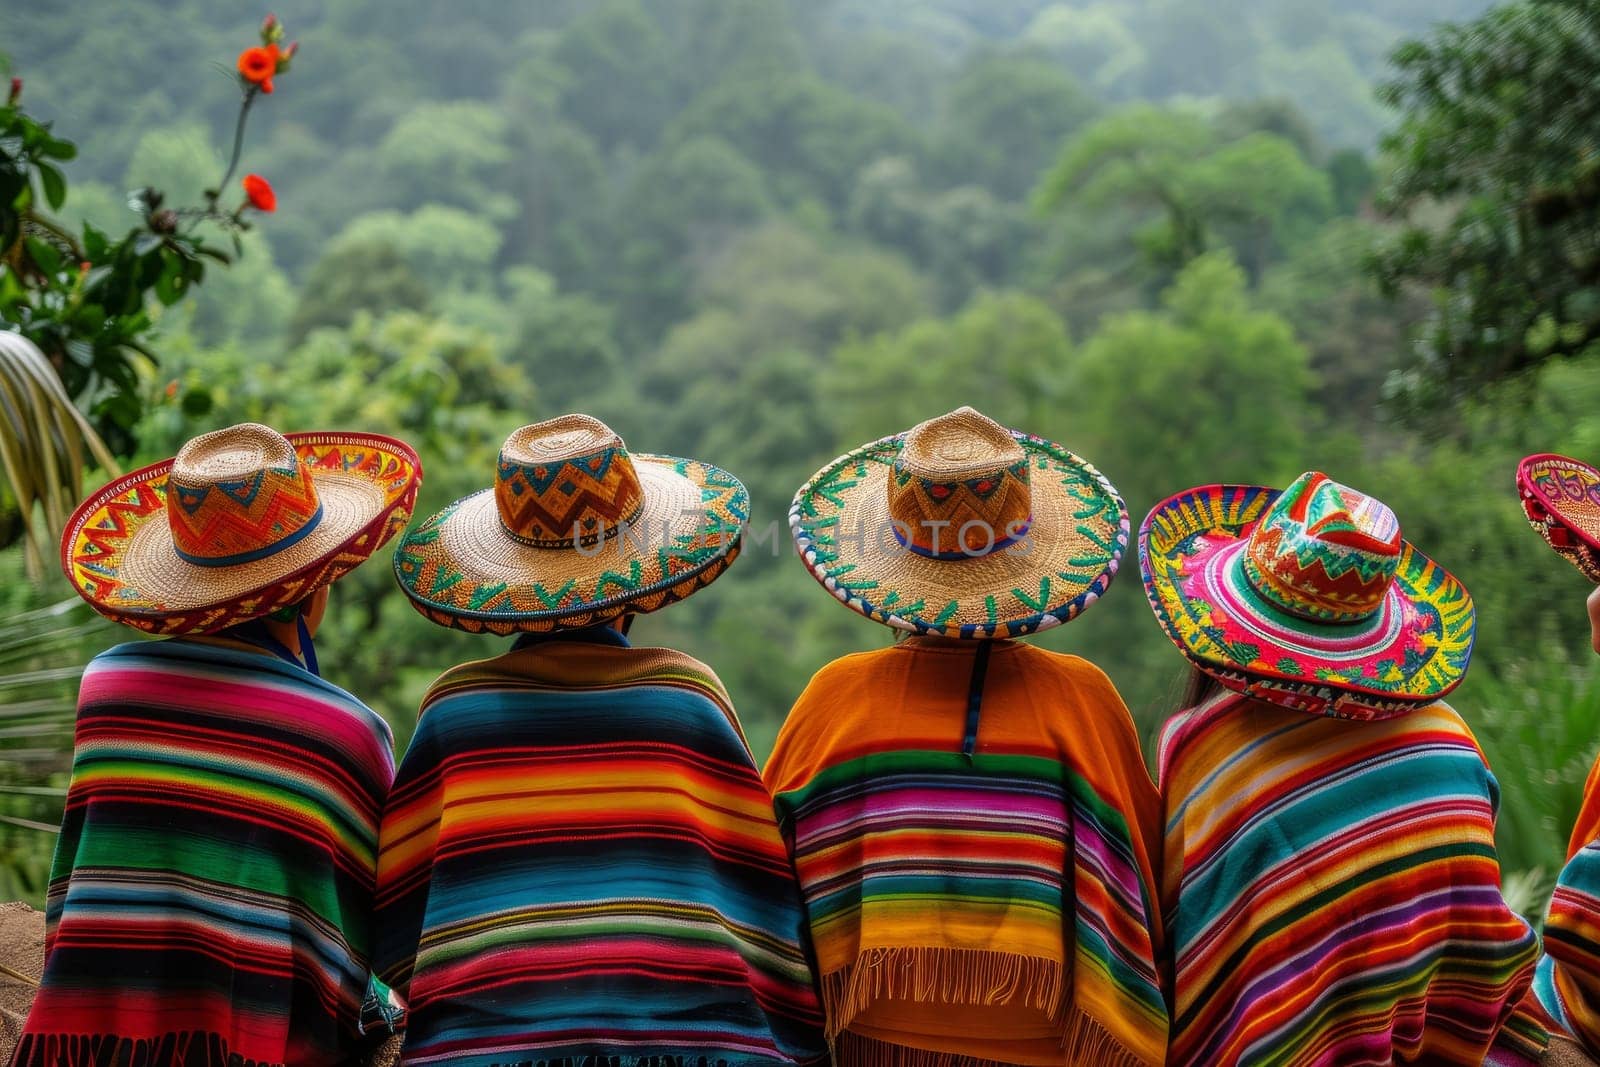 Mexican Culture, People Wearing Sombreros and Ponchos Overlooking Lush Green Landscape